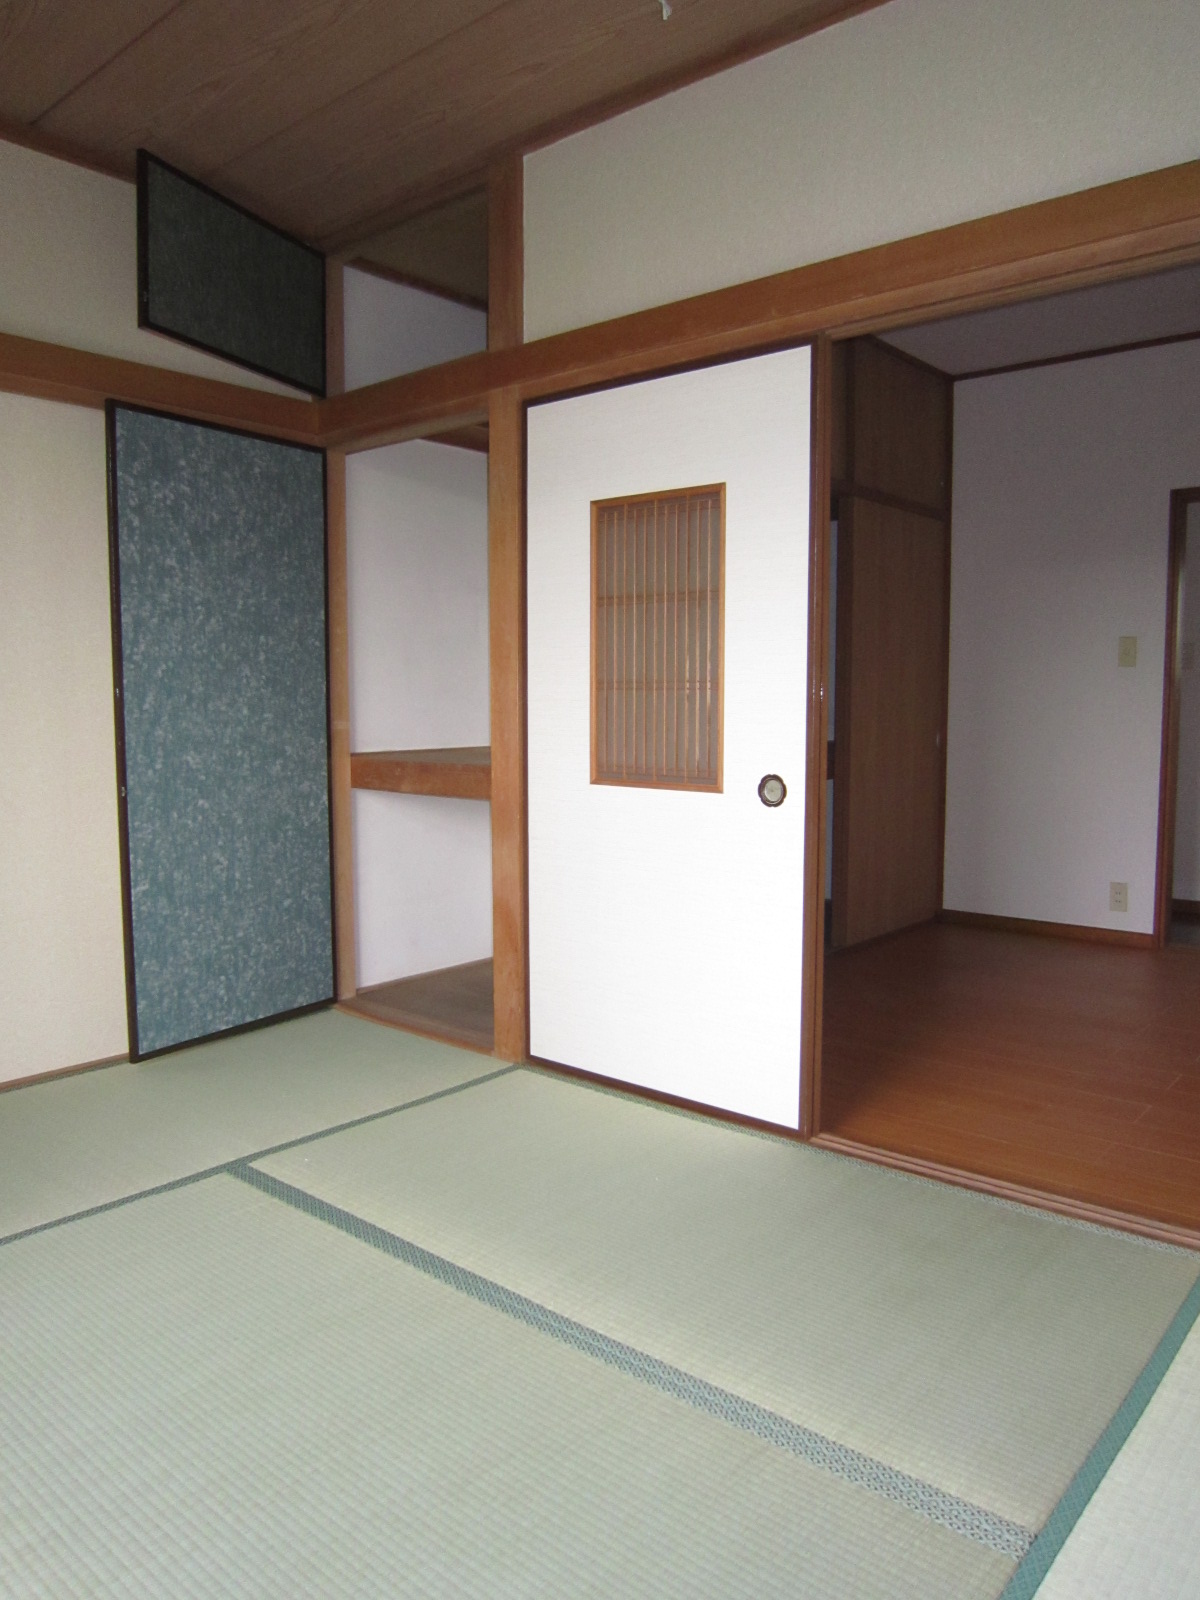 Living and room. Room of 2K type of Japanese and Western room More